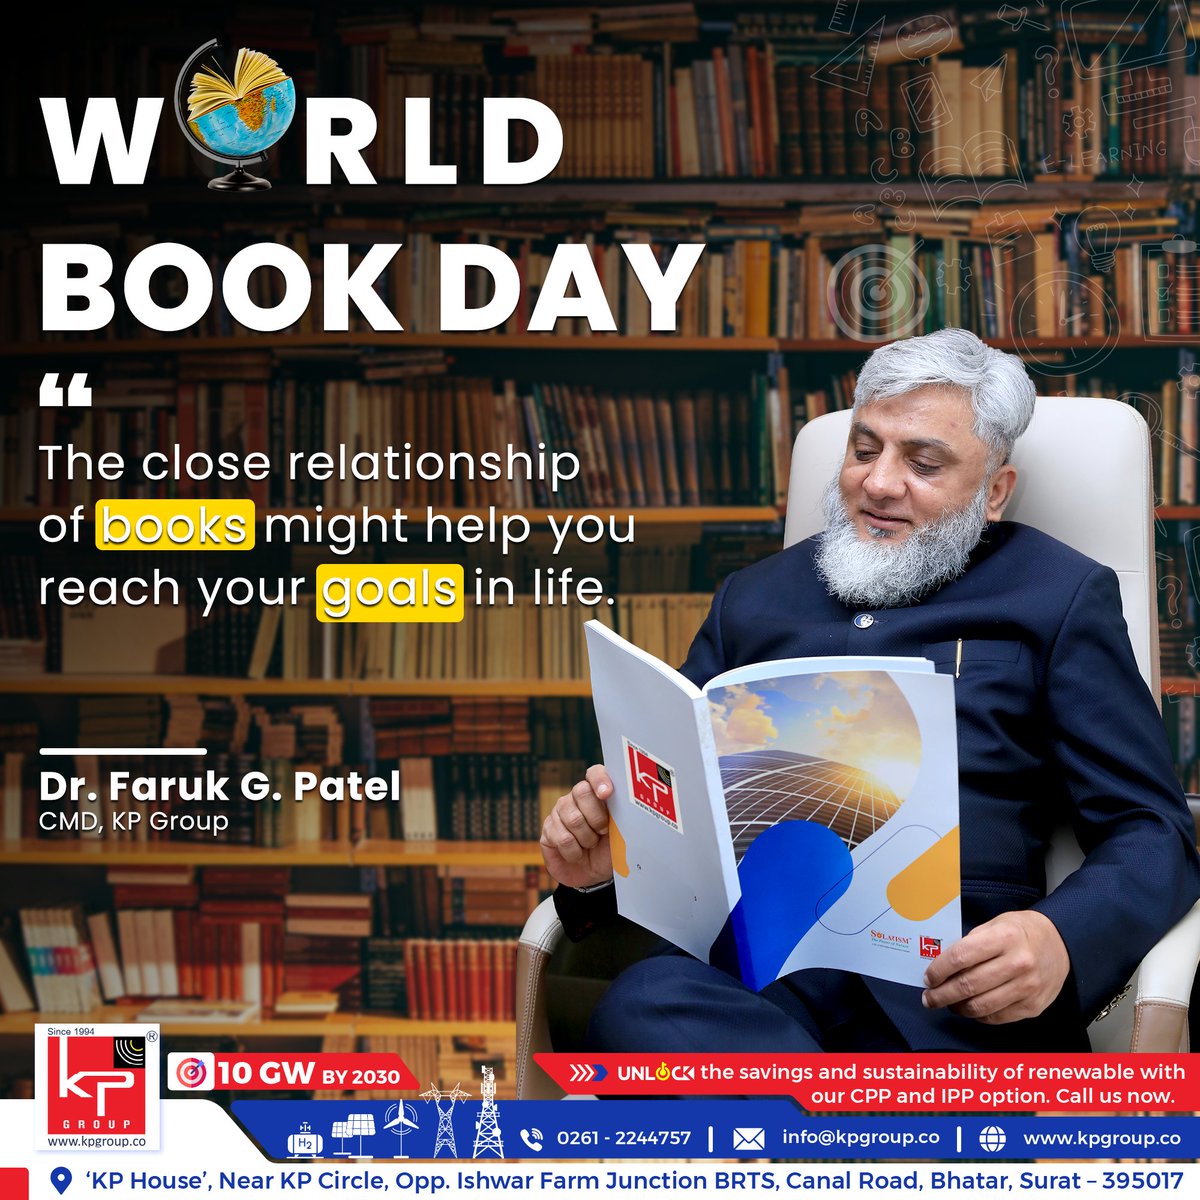 A great book is like a Good mentor, It gives you better perspective, knowledge and guidance. #WorldBookDay #kpgroup #drfarukpatel #farukpatel